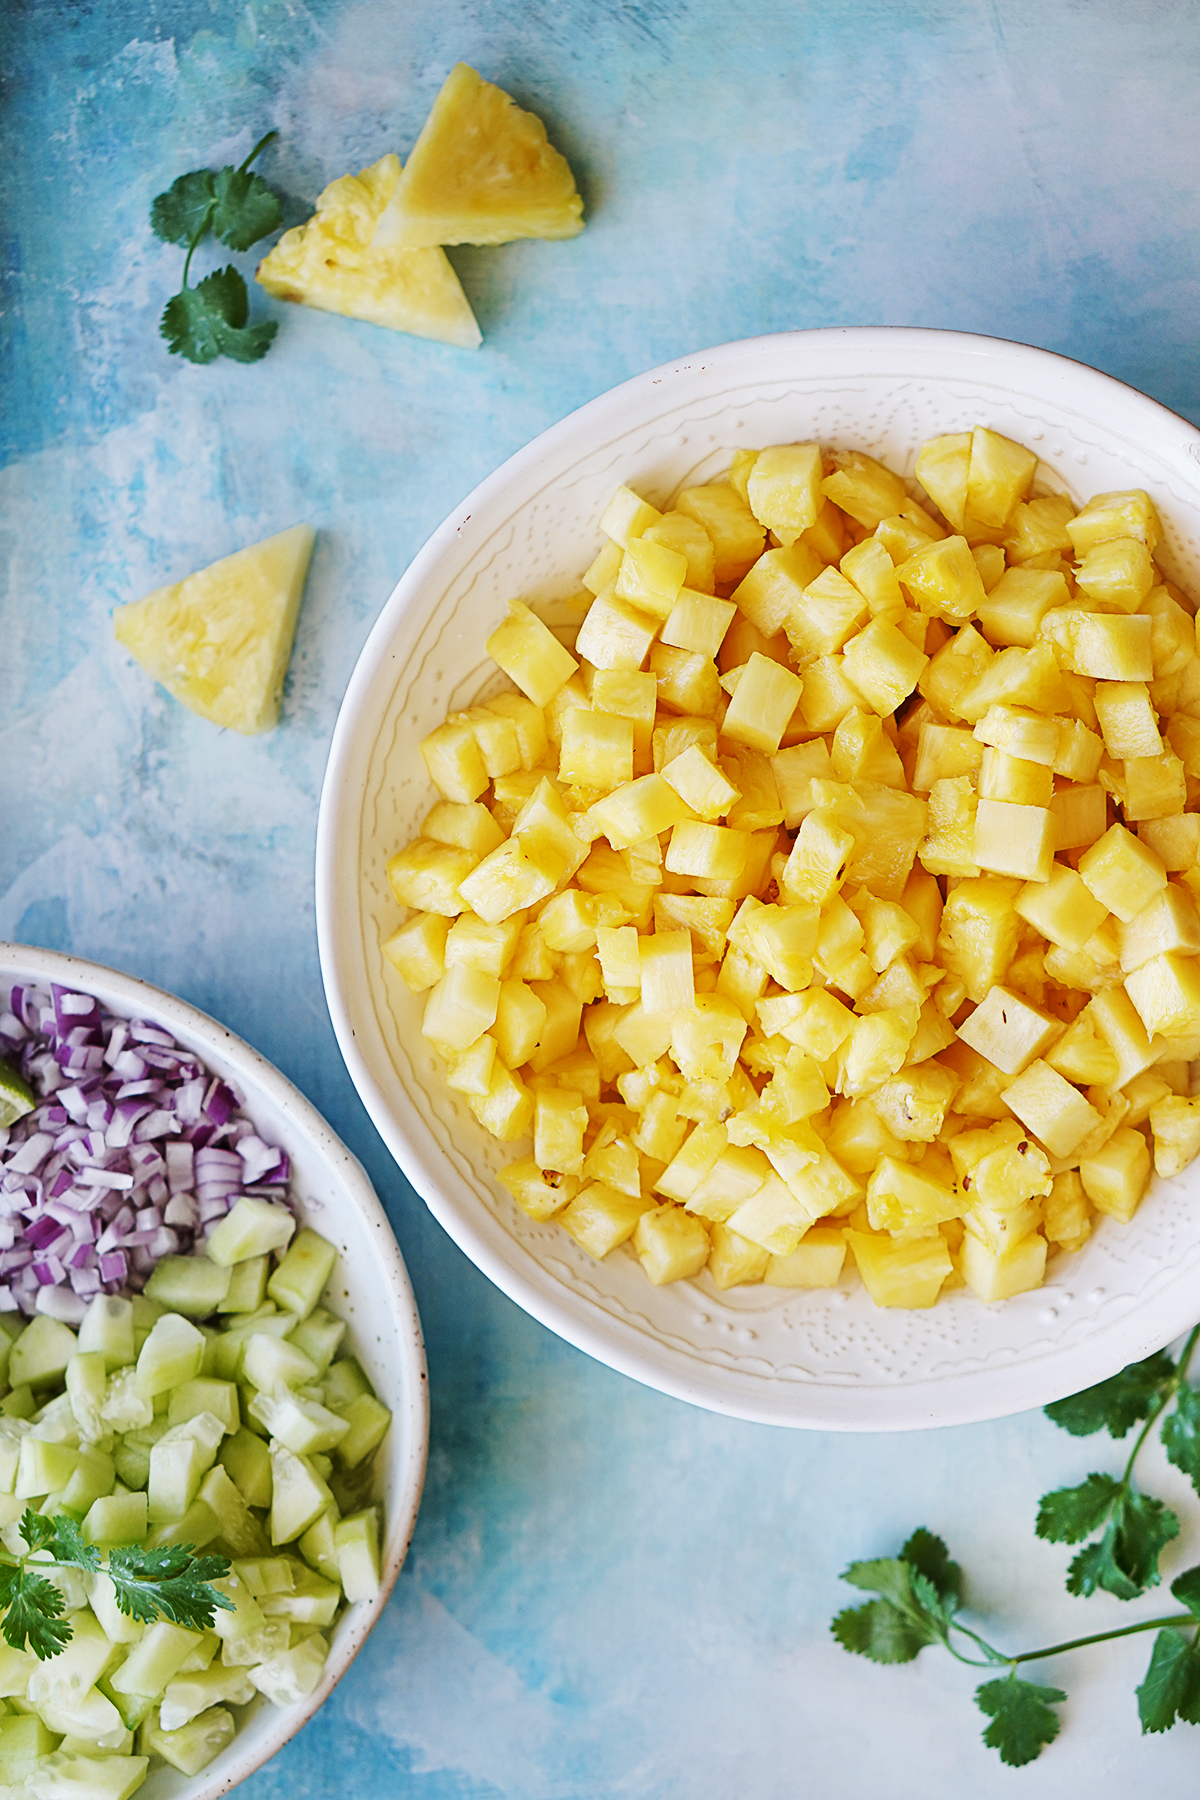 Ingredients: pineapple cut into small chunks, cucumbers and red onions.